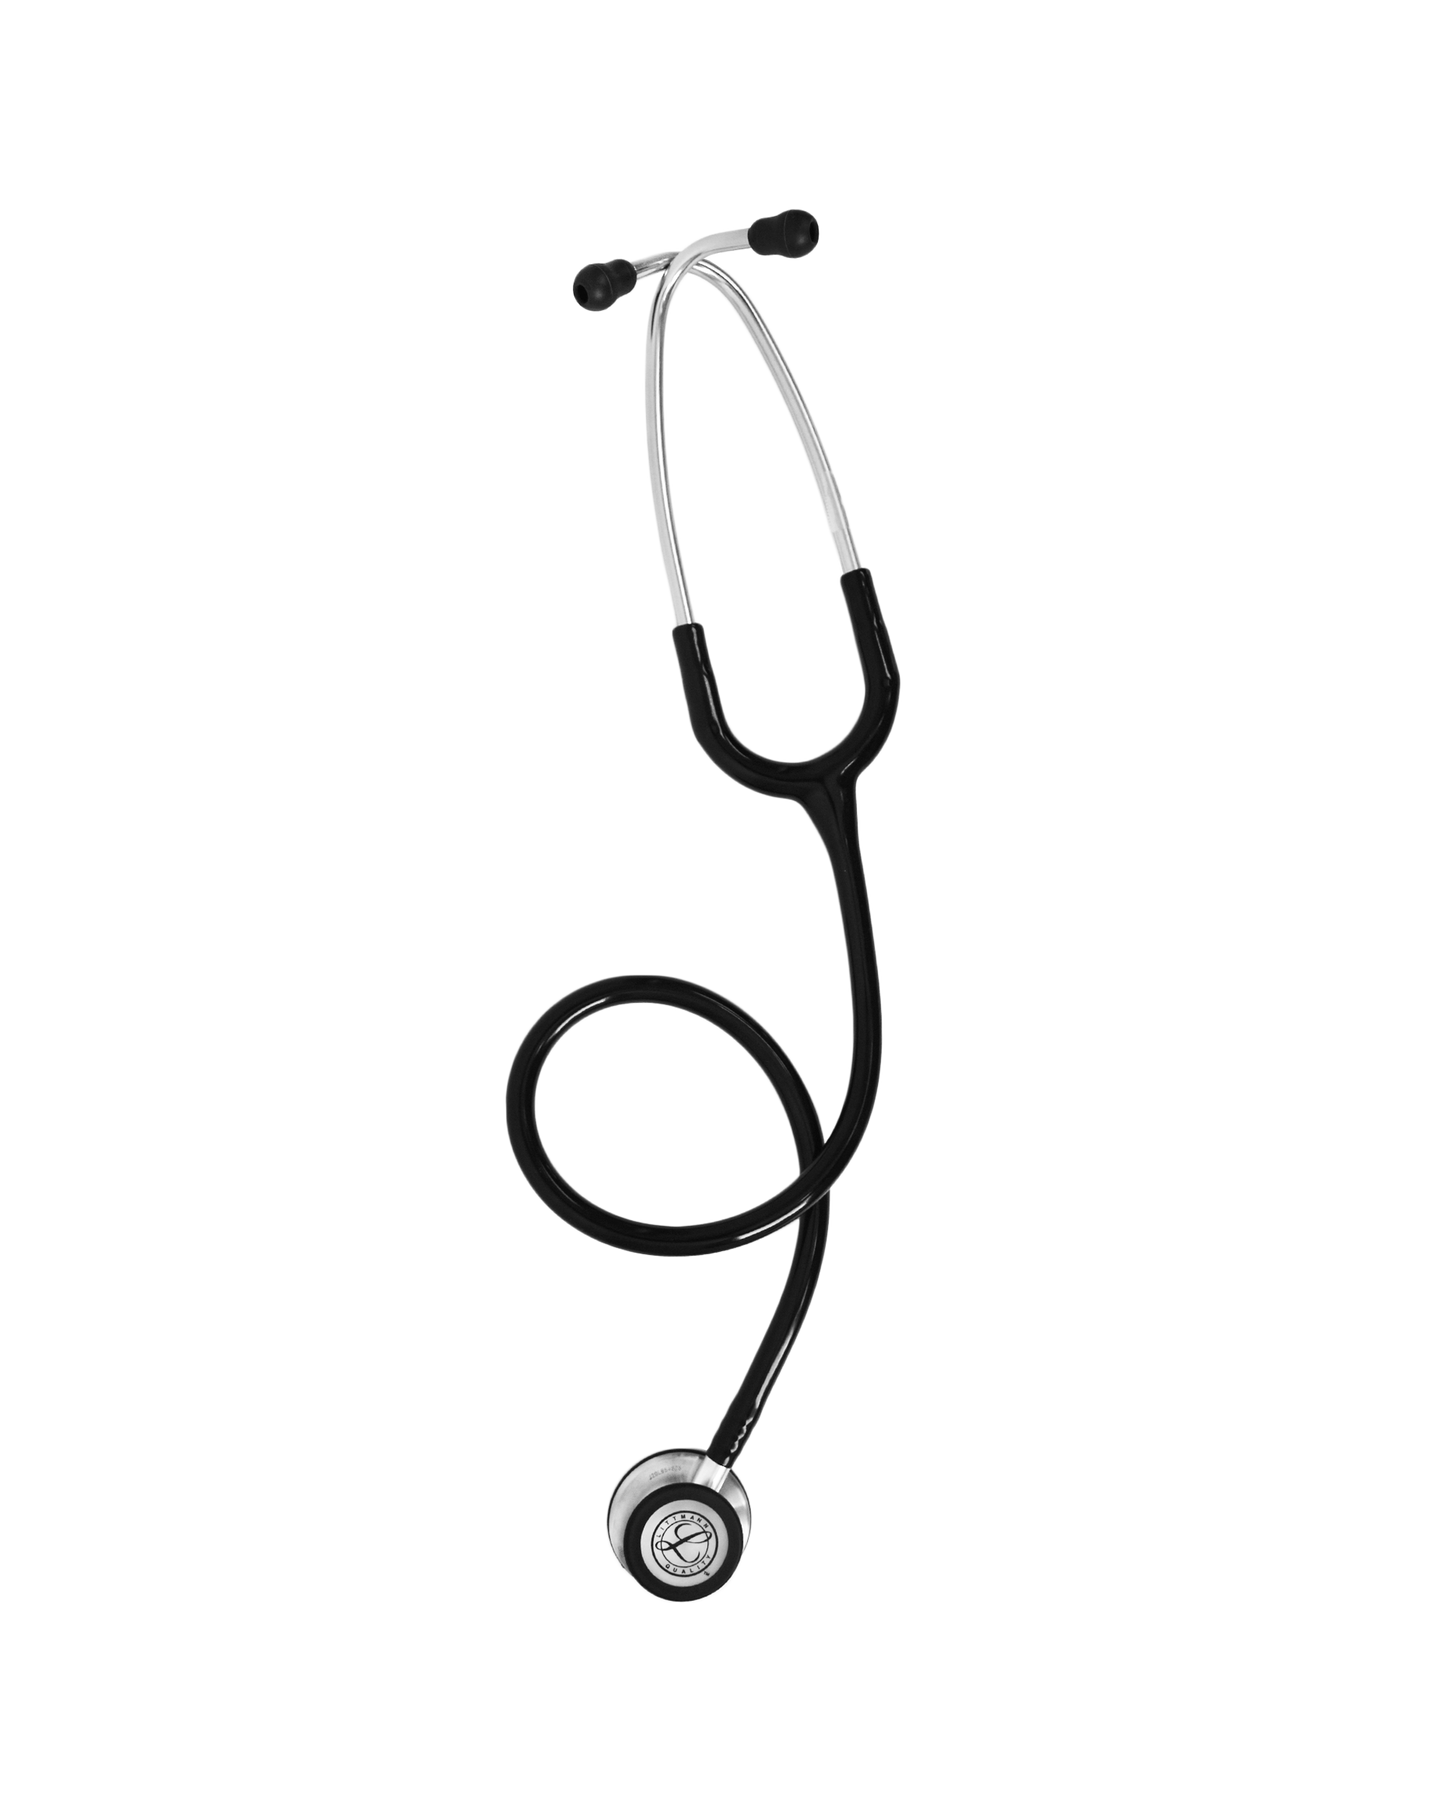 Stethoscopes Are Among The Most Important Tools For Doctor On Black  Background Stock Photo - Download Image Now - iStock